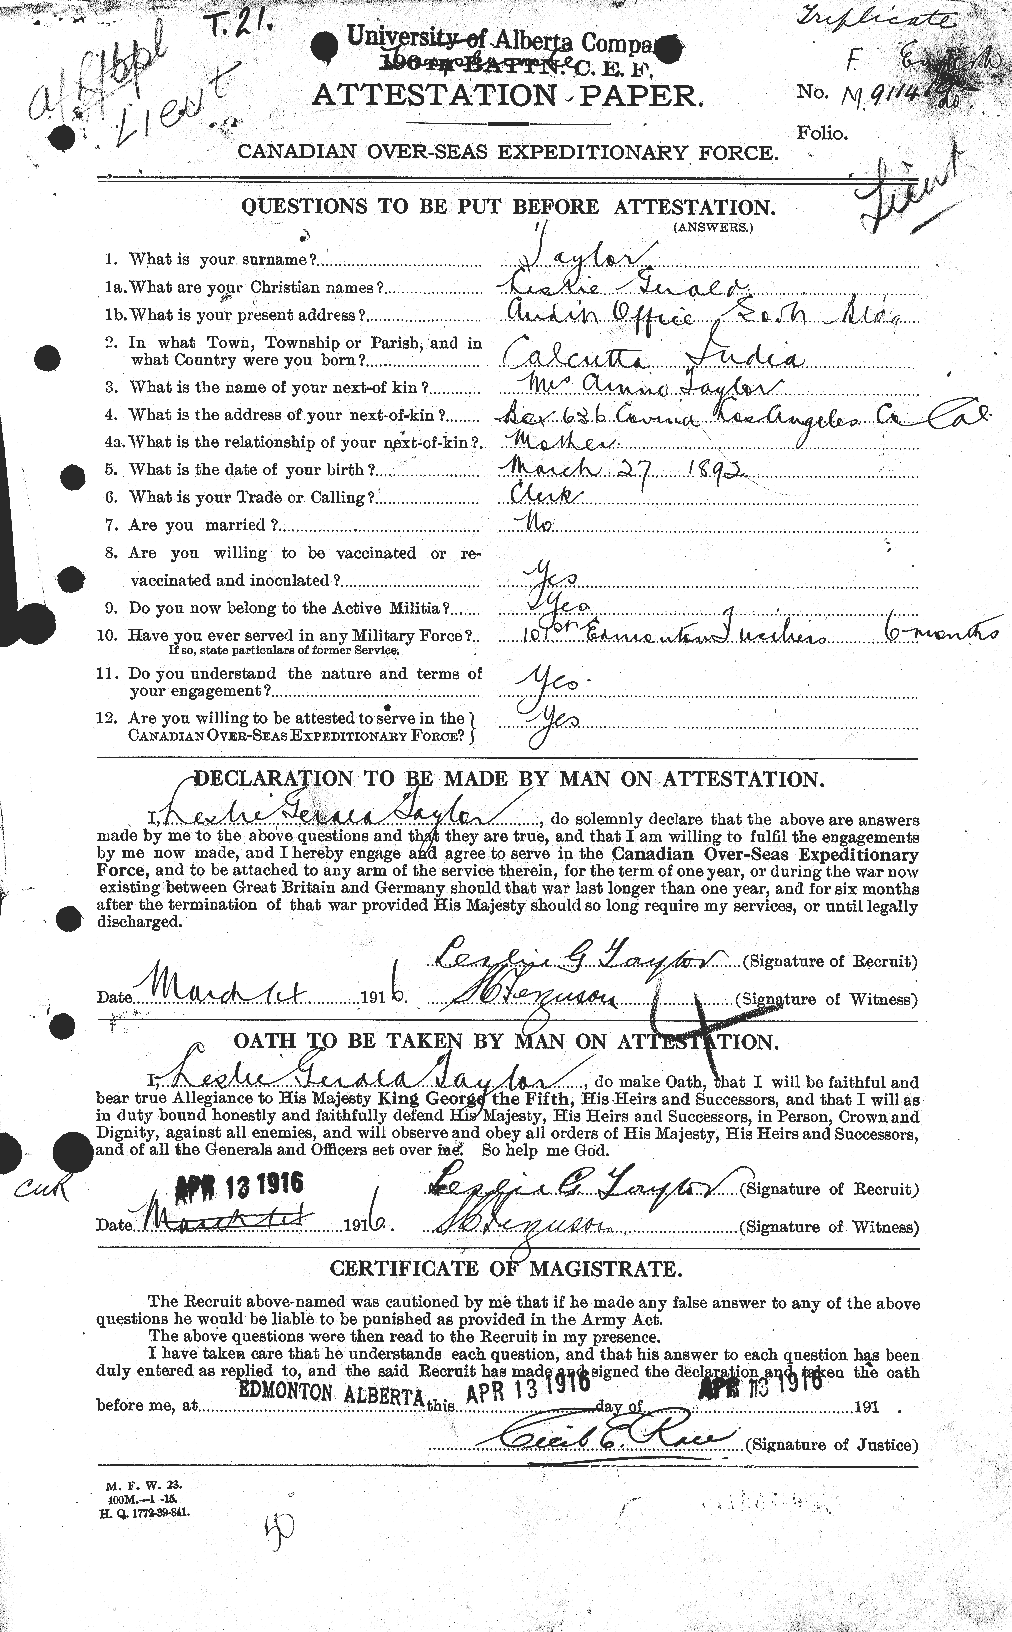 Personnel Records of the First World War - CEF 627639a